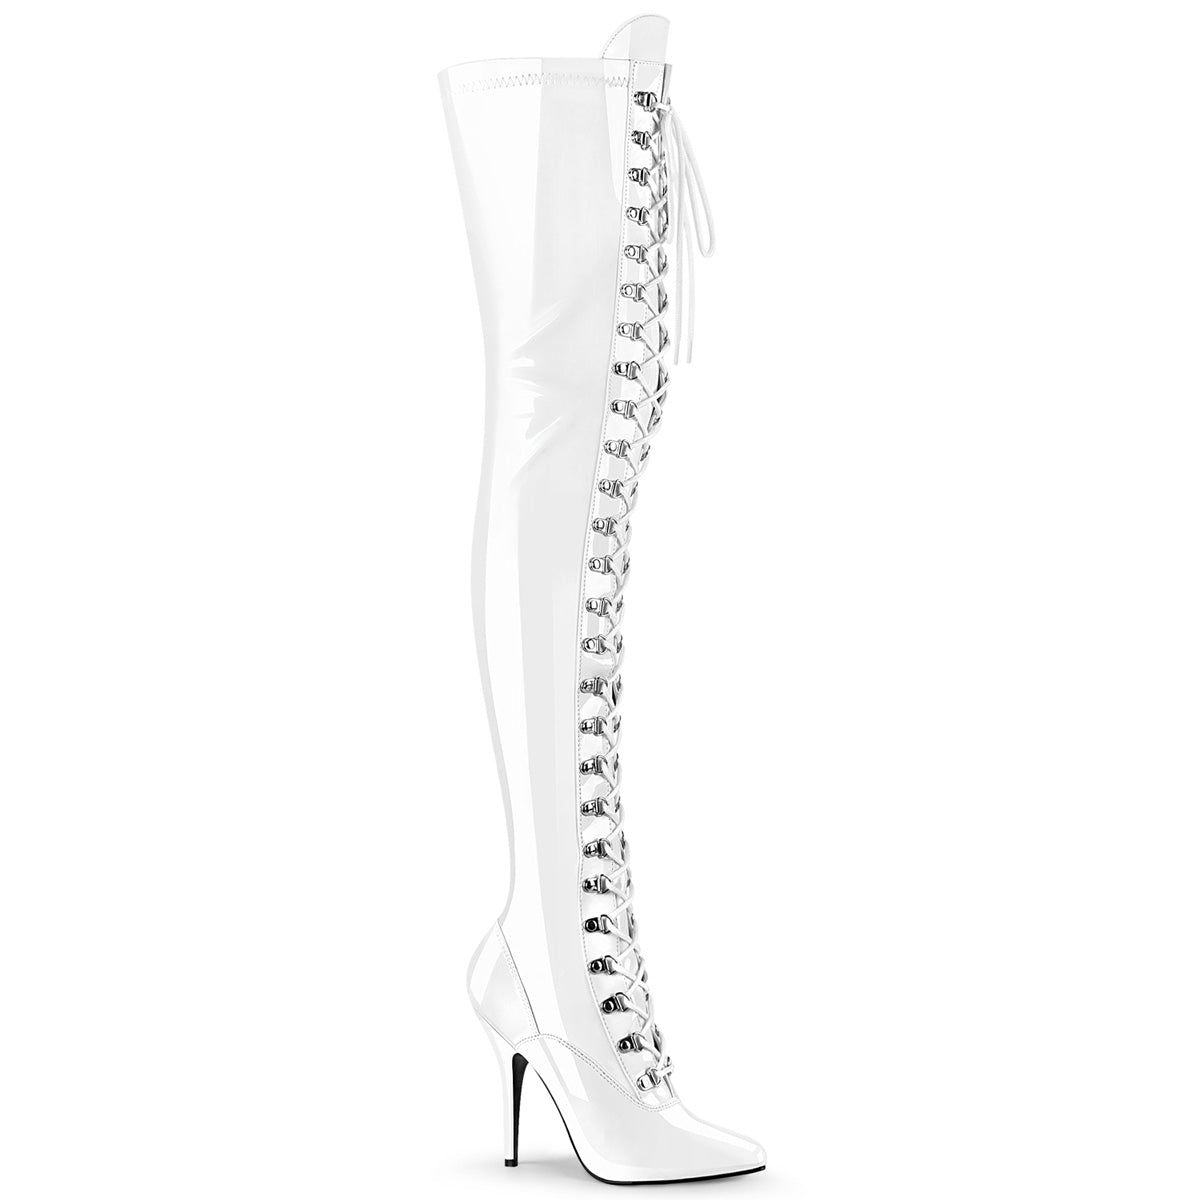 SEDUCE-3024 Pleasers Single Soles White Thigh High Boots Pleasers